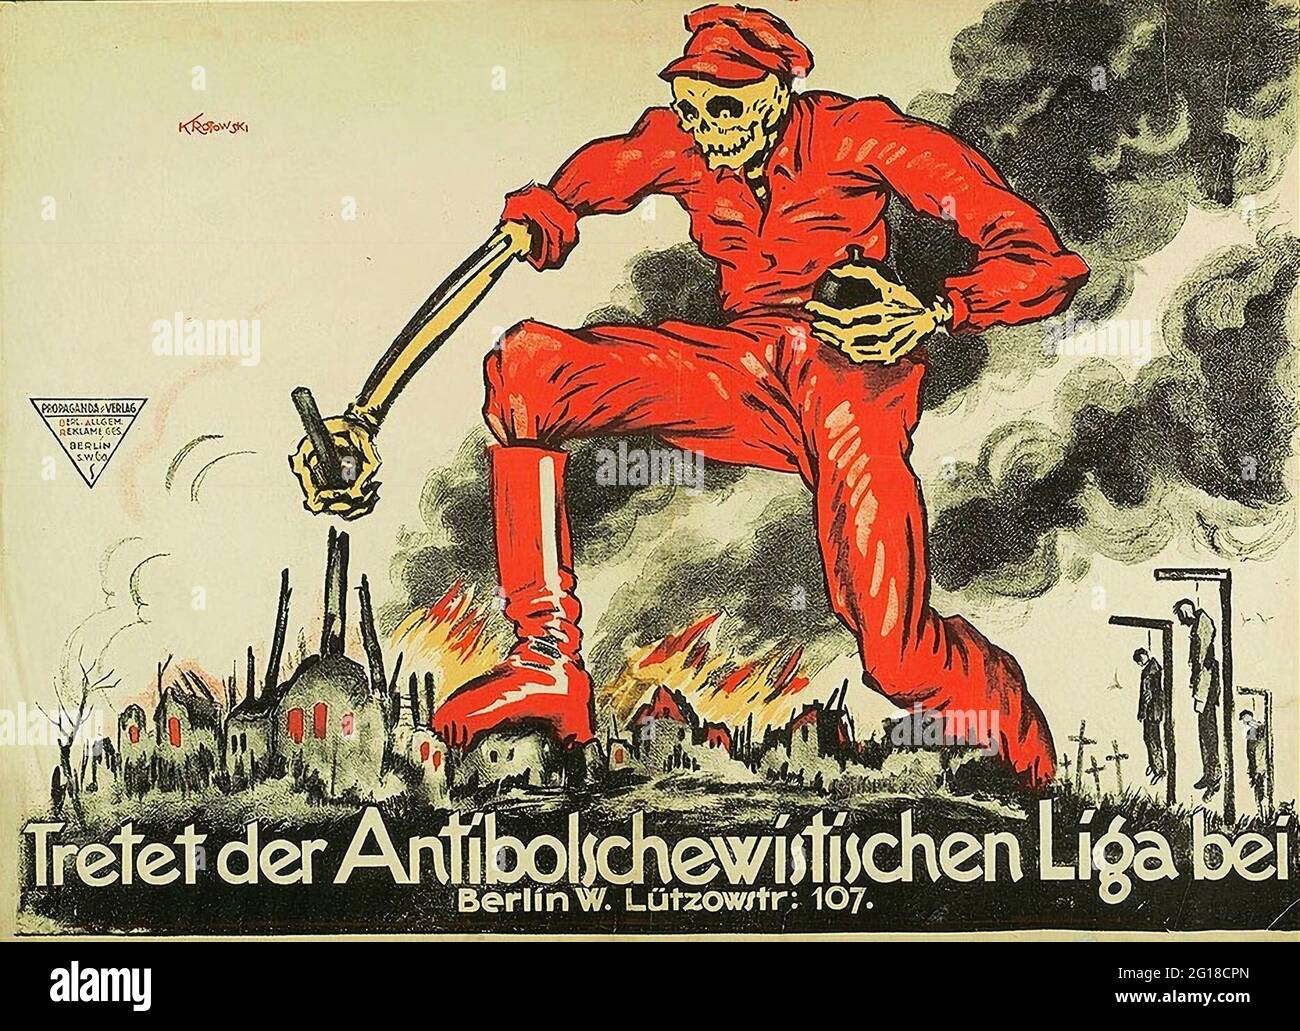 A german anti-communist poster frpm 1919 showing Death dressed in red walking over a burning town with the slogan "Join the Anti-Bolshevik League" Stock Photo